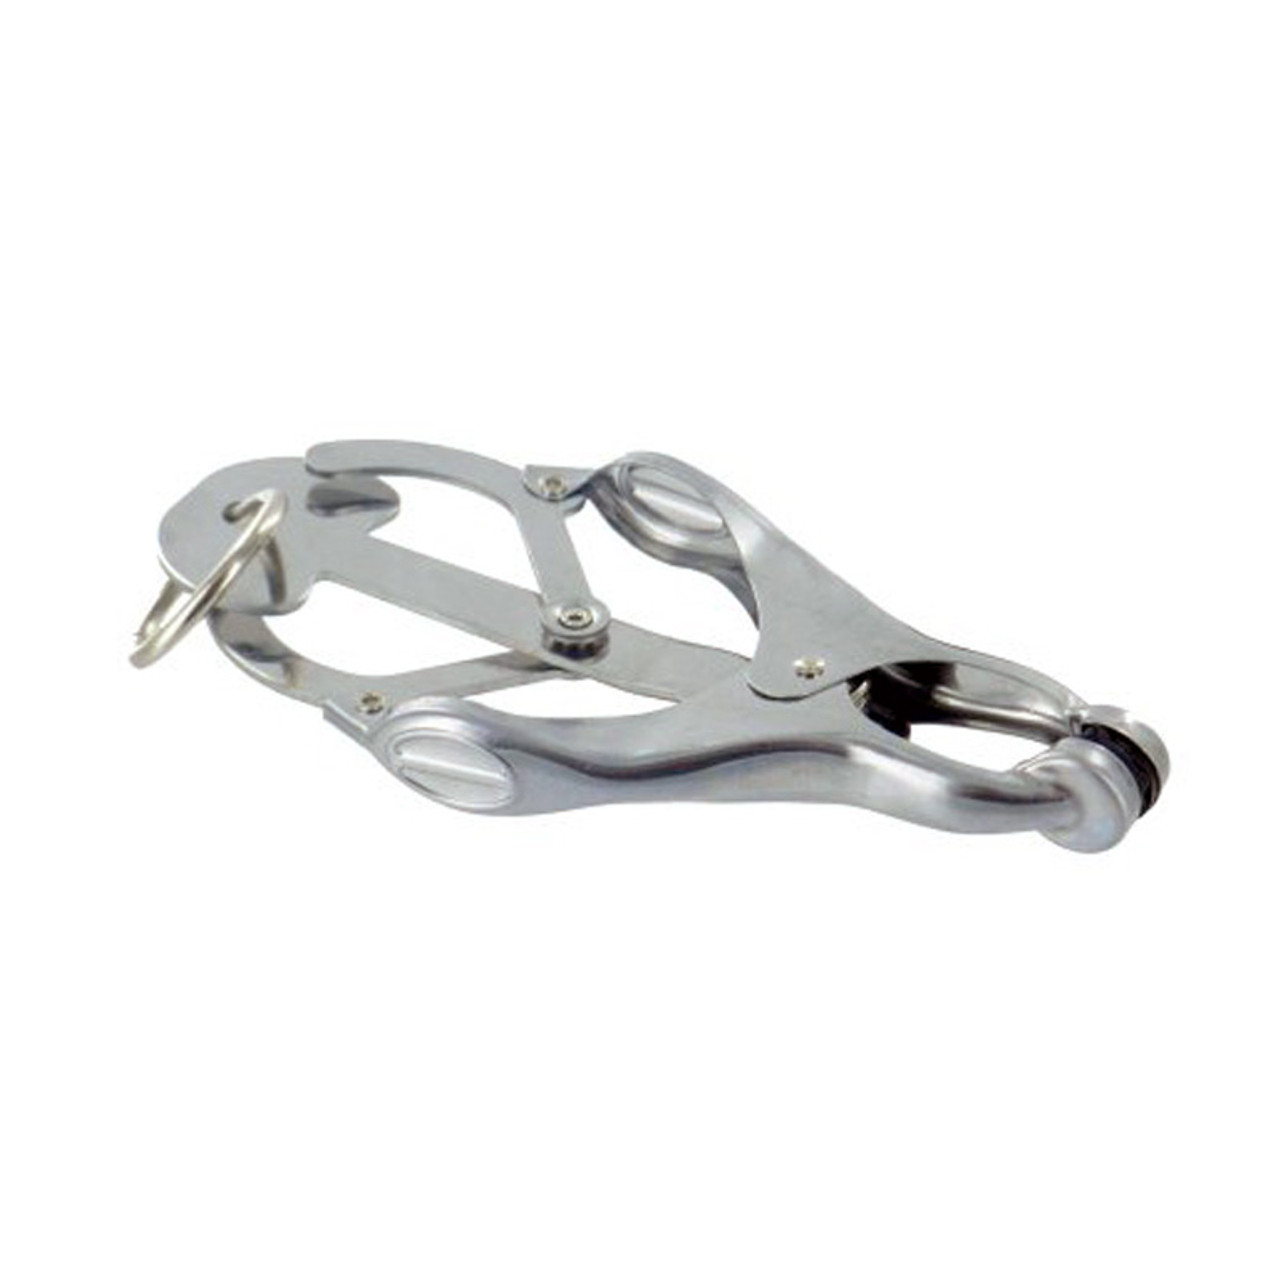  Master Series Slave Bucket Monarch Nipple Clamps for Men,  Women, & BDSM Couples : Health & Household